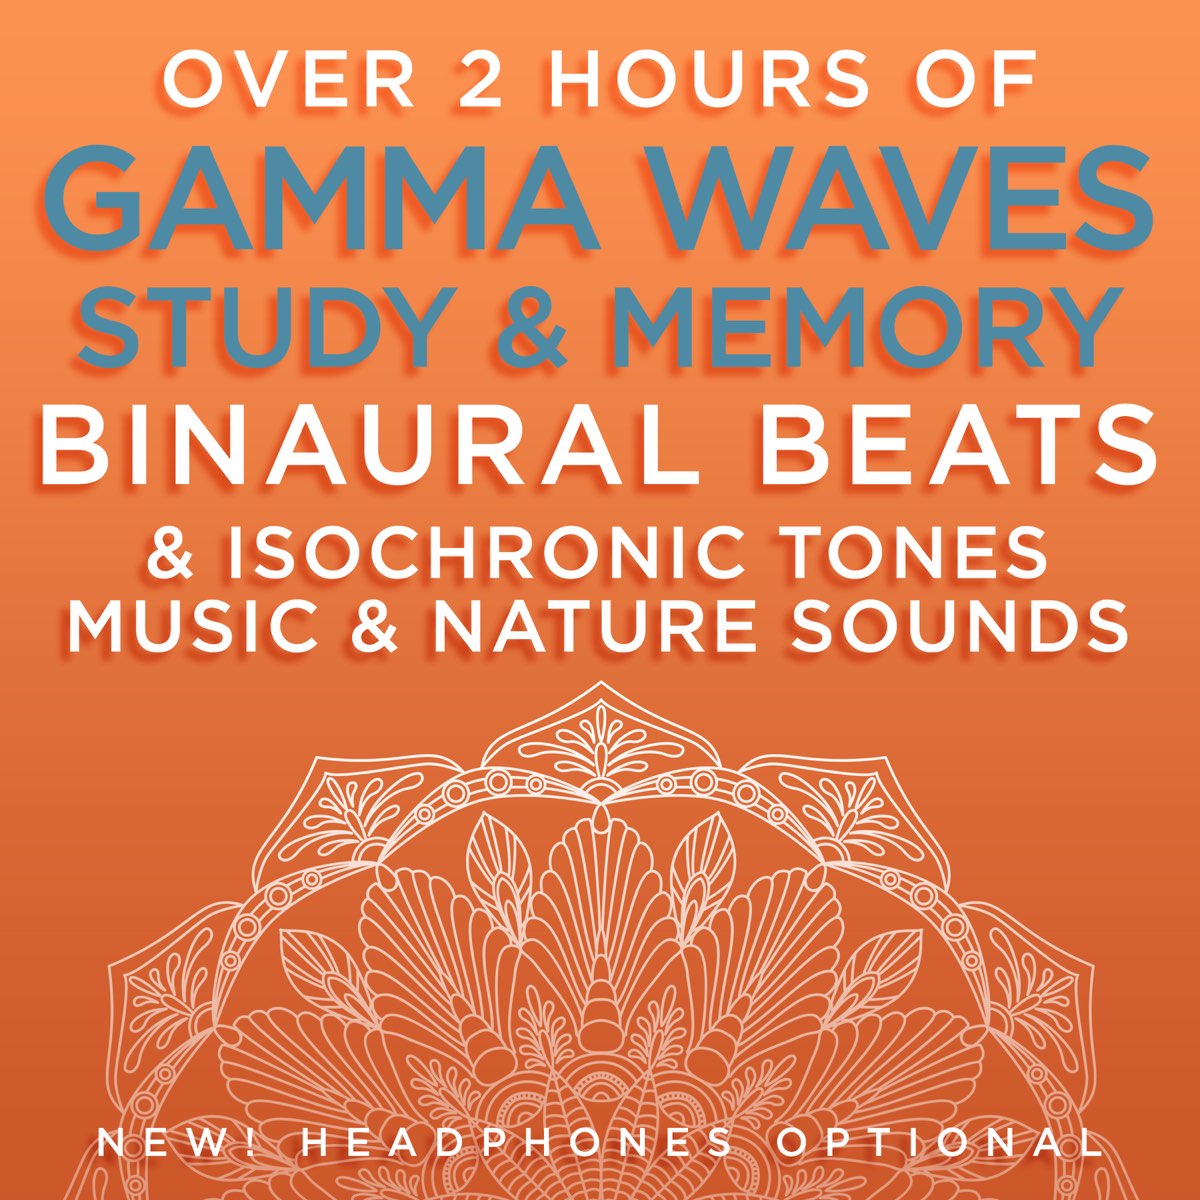 Over 2 Hours of Gamma Waves Study & Memory Binaural Beats & Isochronic Tones  Music & Nature Sounds by Binaural Beats Research & David & Steve Gordon on  Apple Music